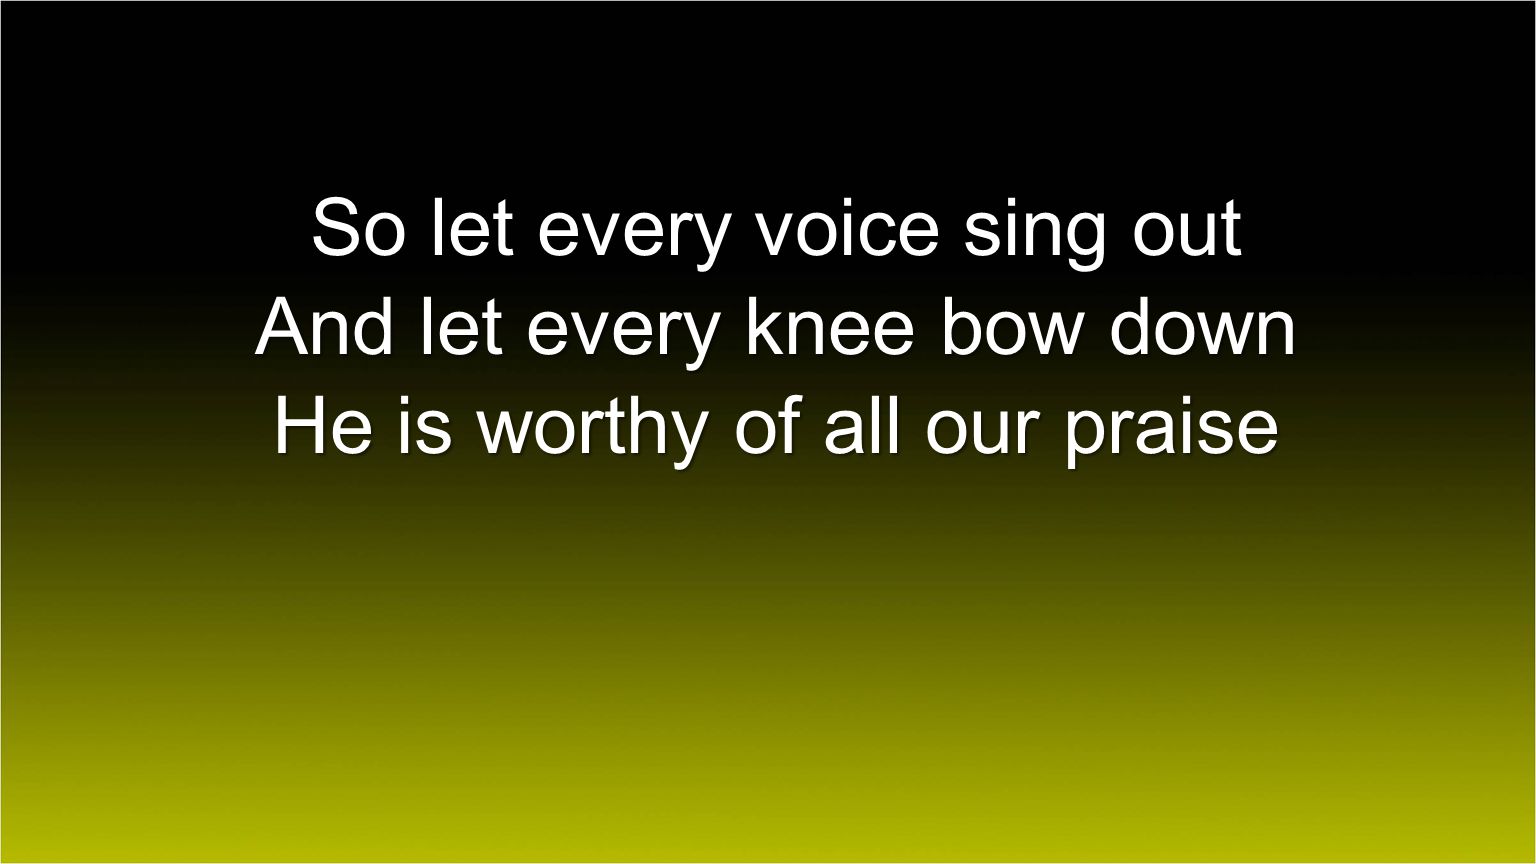 So let every voice sing out And let every knee bow down